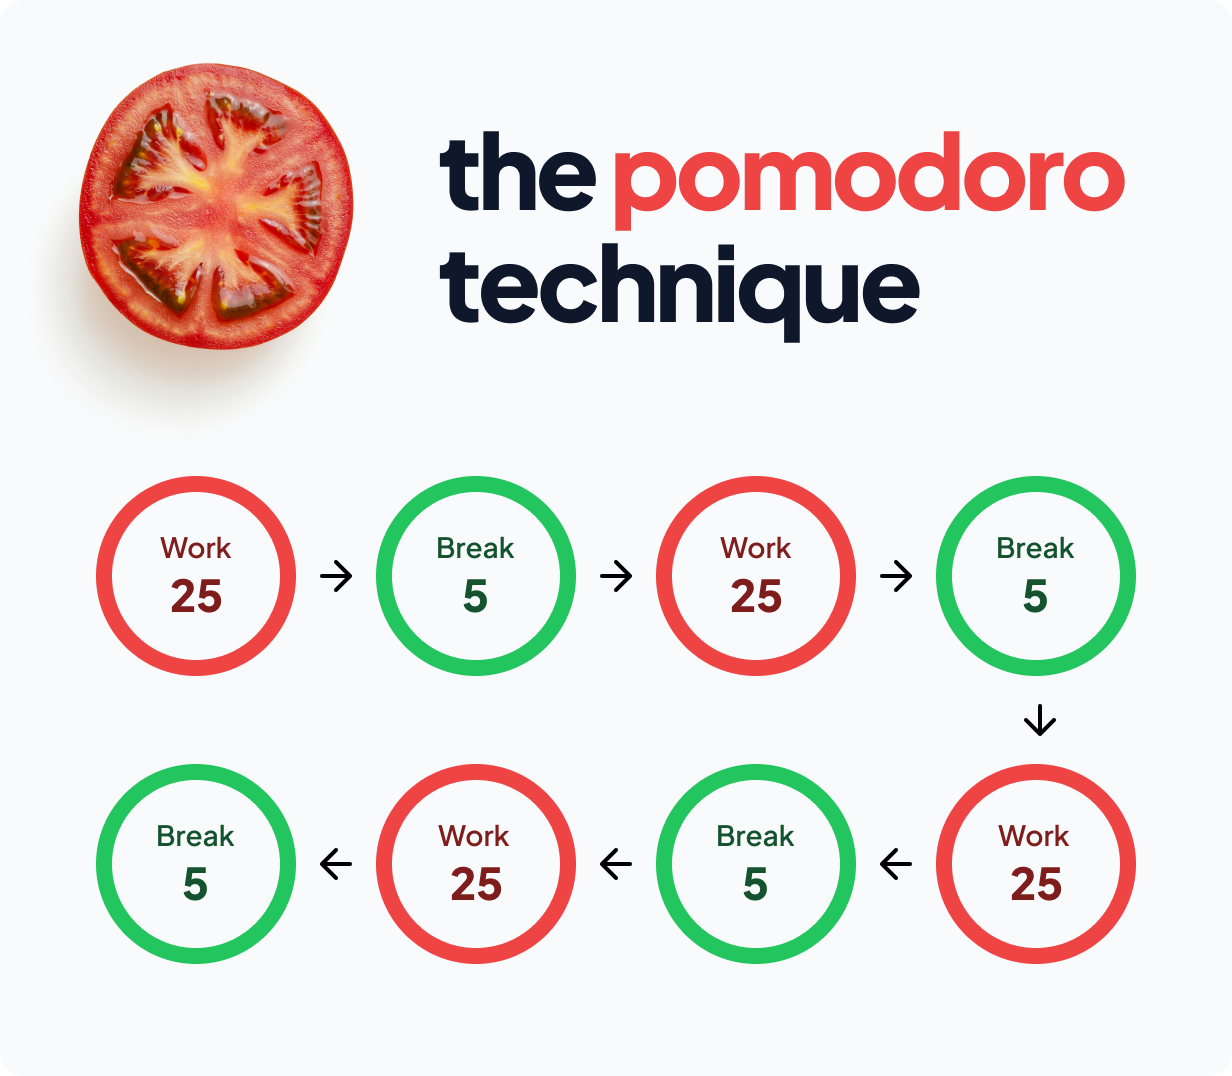 A guide to the pomodoro technique - infographic